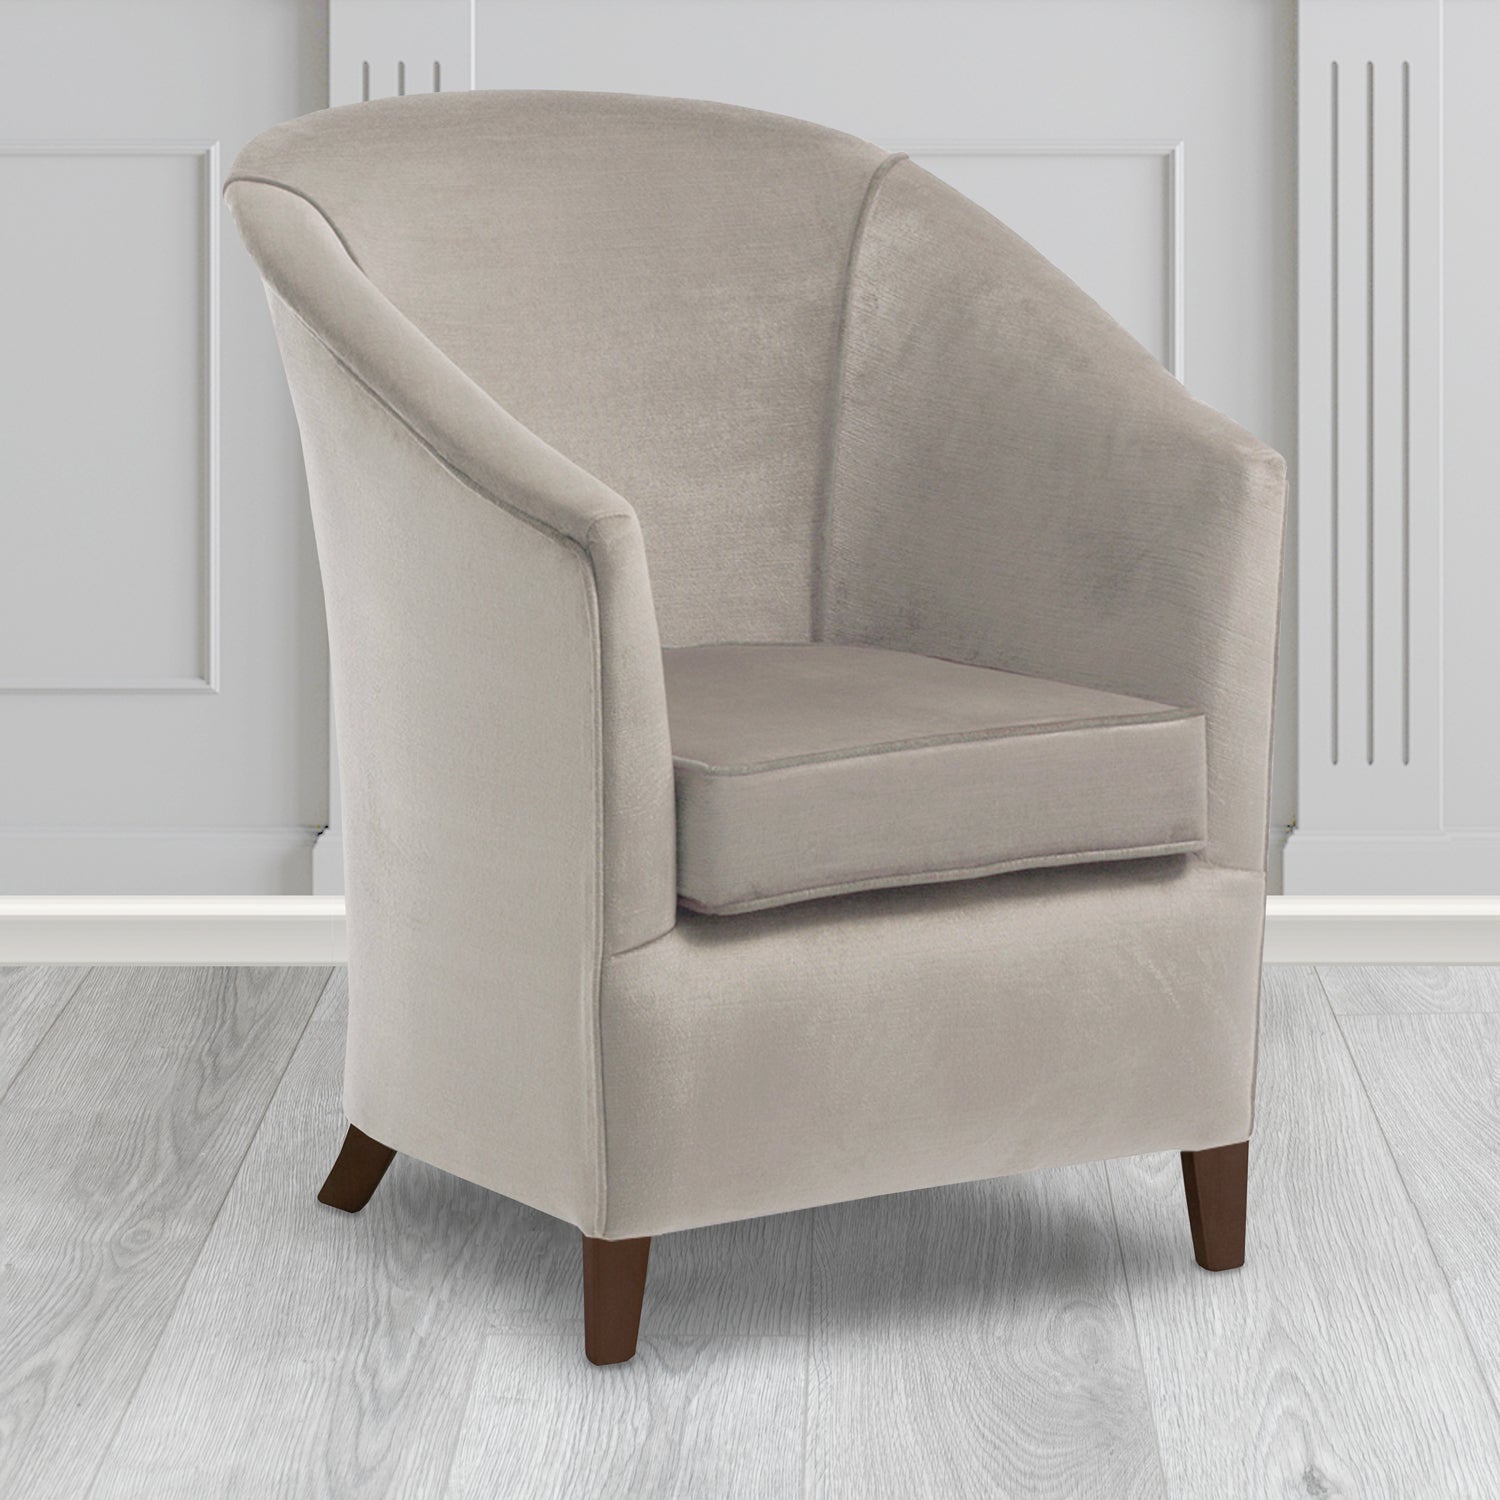 Bolton Tub Chair in Noble 952 Platinum Crib 5 Velvet Fabric - Water Resistant - The Tub Chair Shop